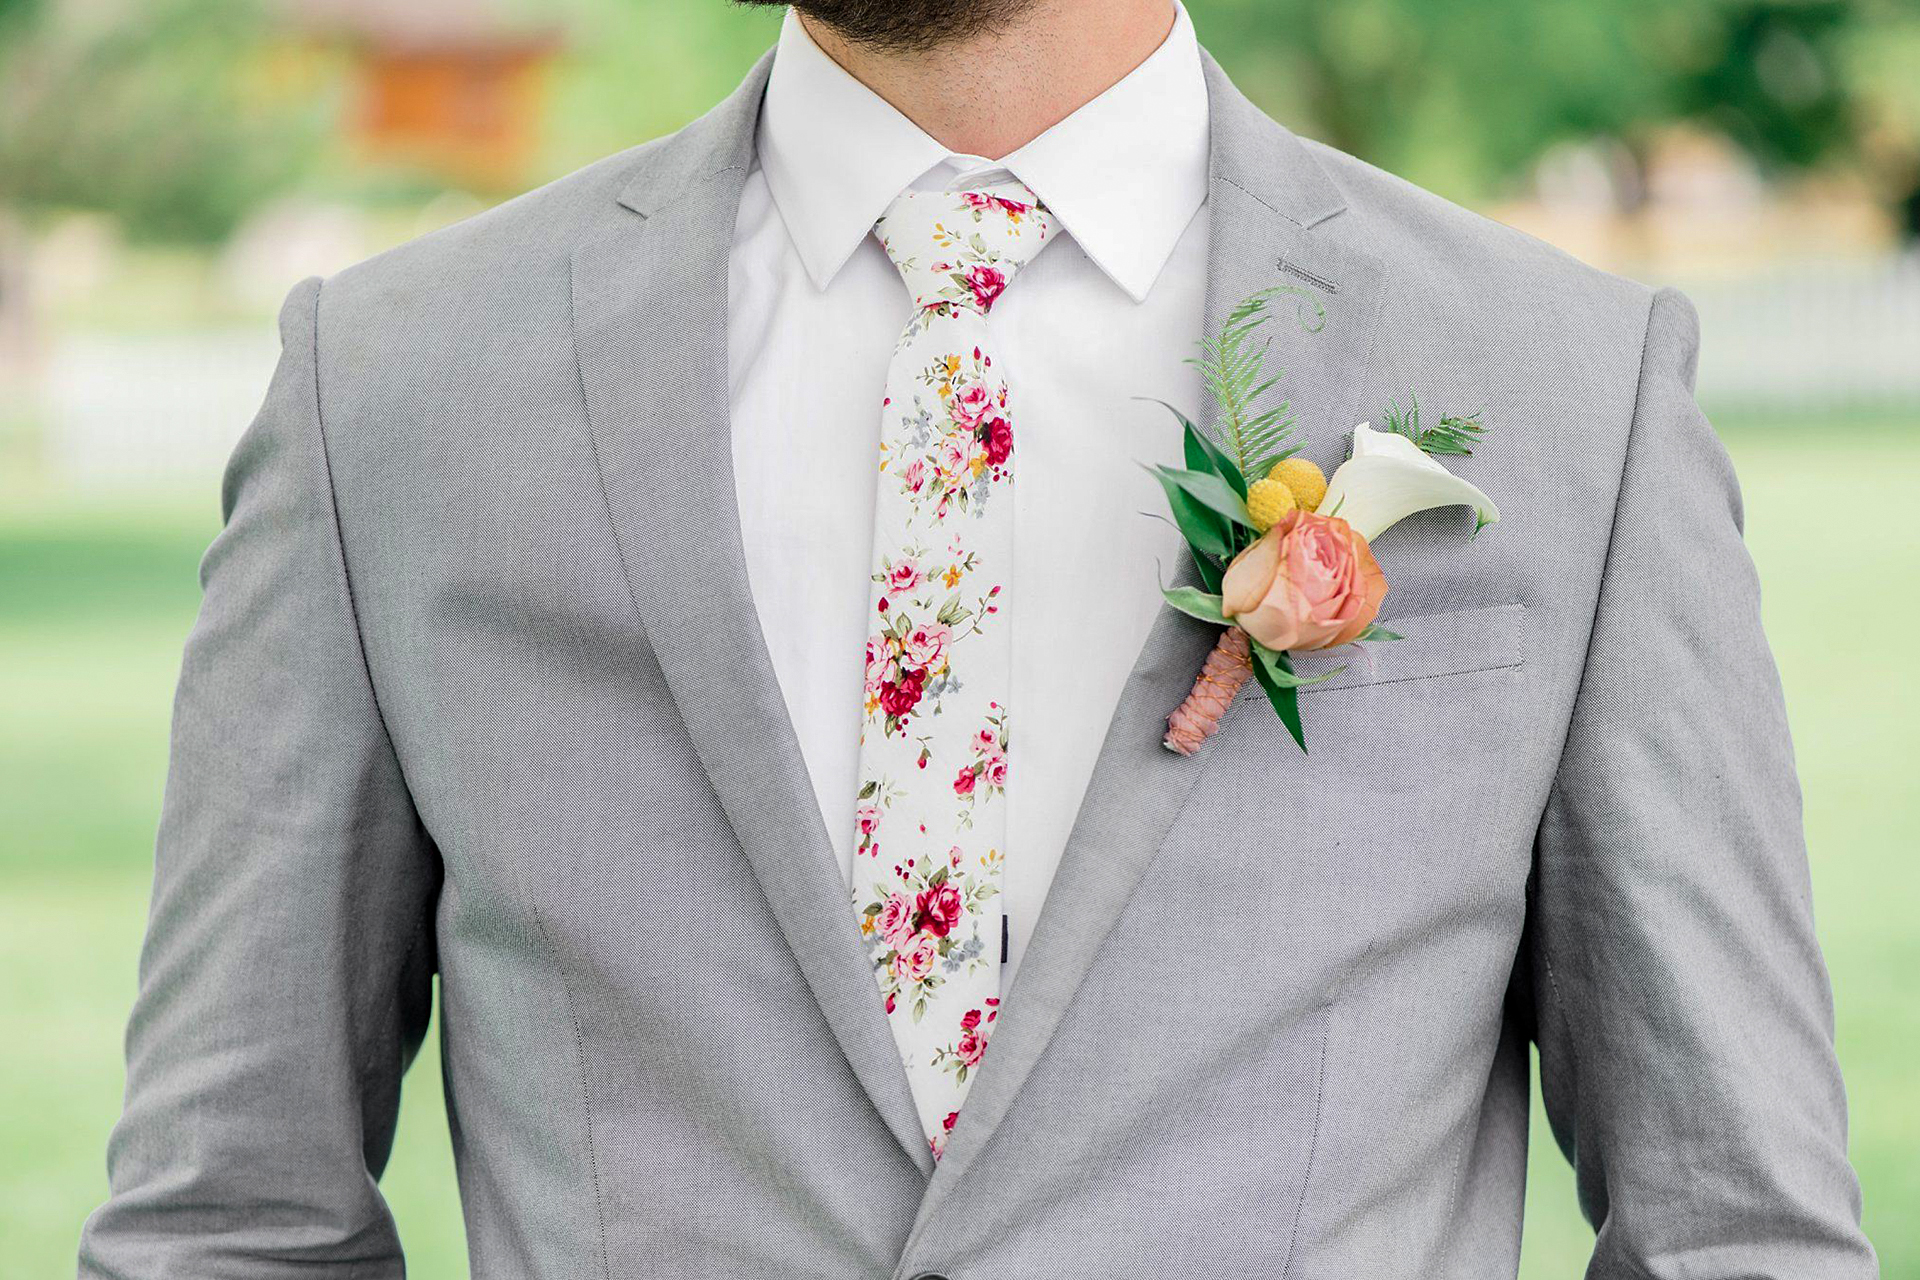 wearing a gray suit with white dress shirt and floral tie